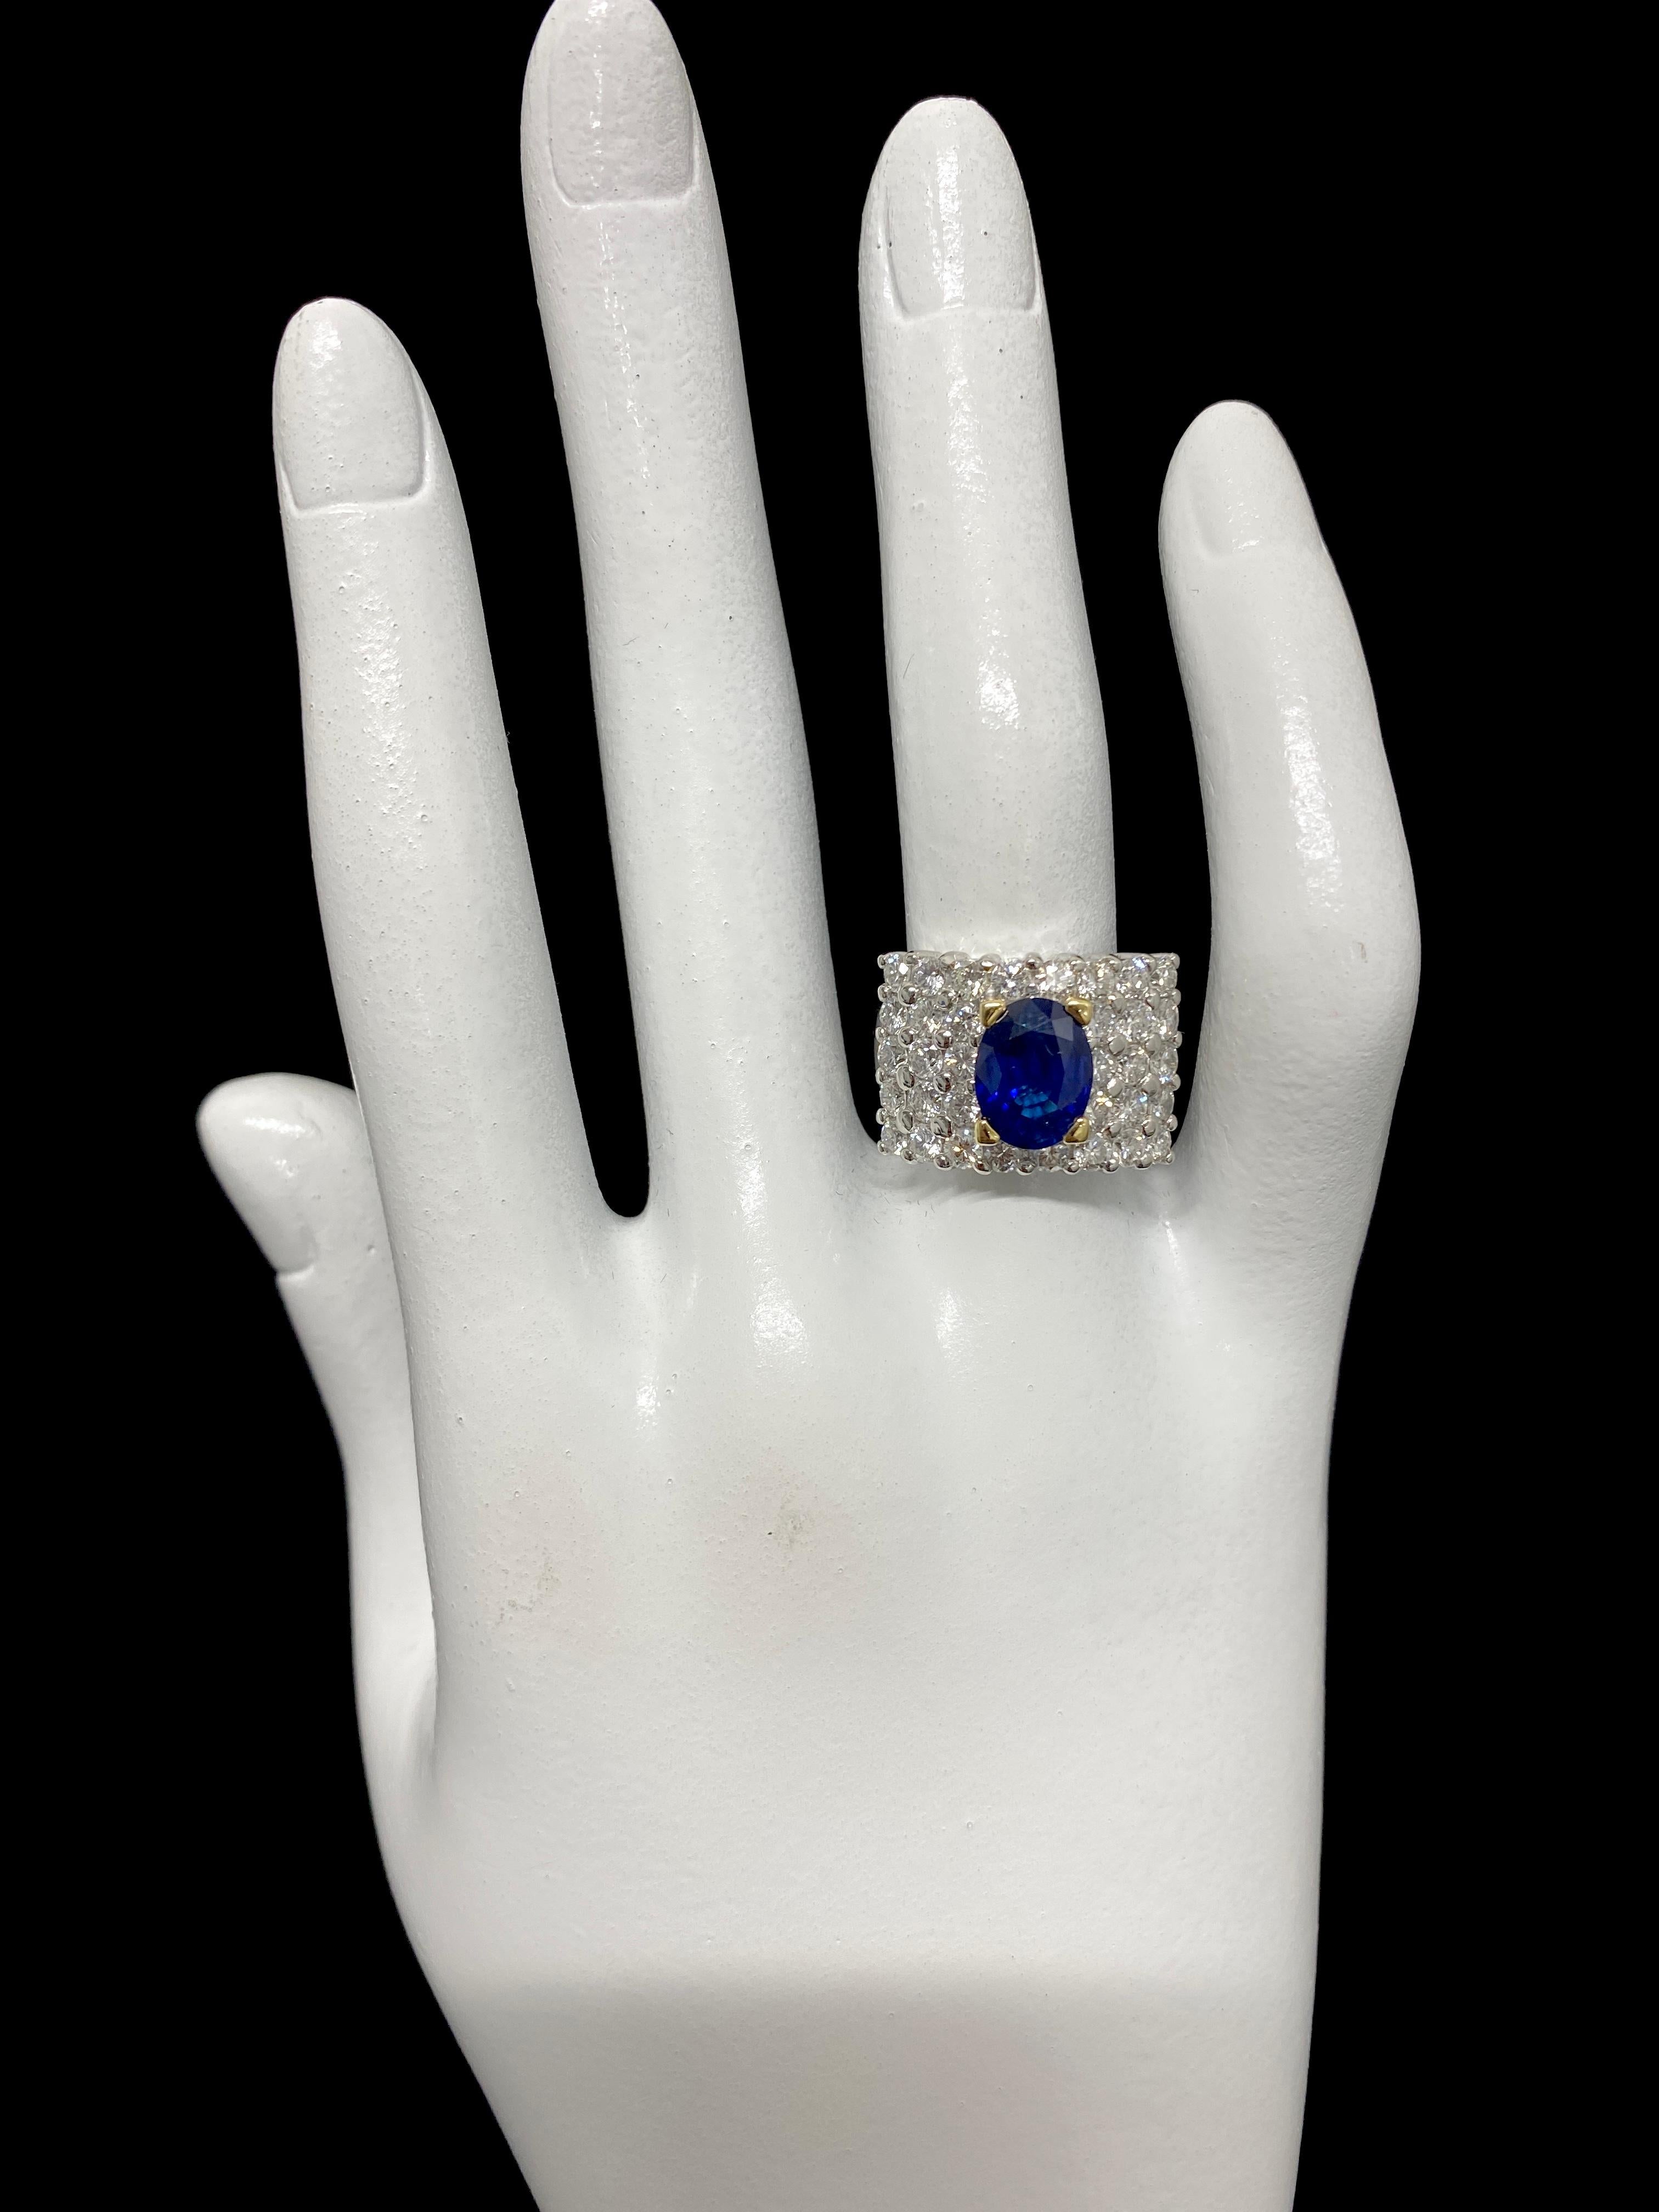 Oval Cut 2.55 Carat Natural Blue Sapphire and Diamond Ring Set in Platinum and 18K Gold